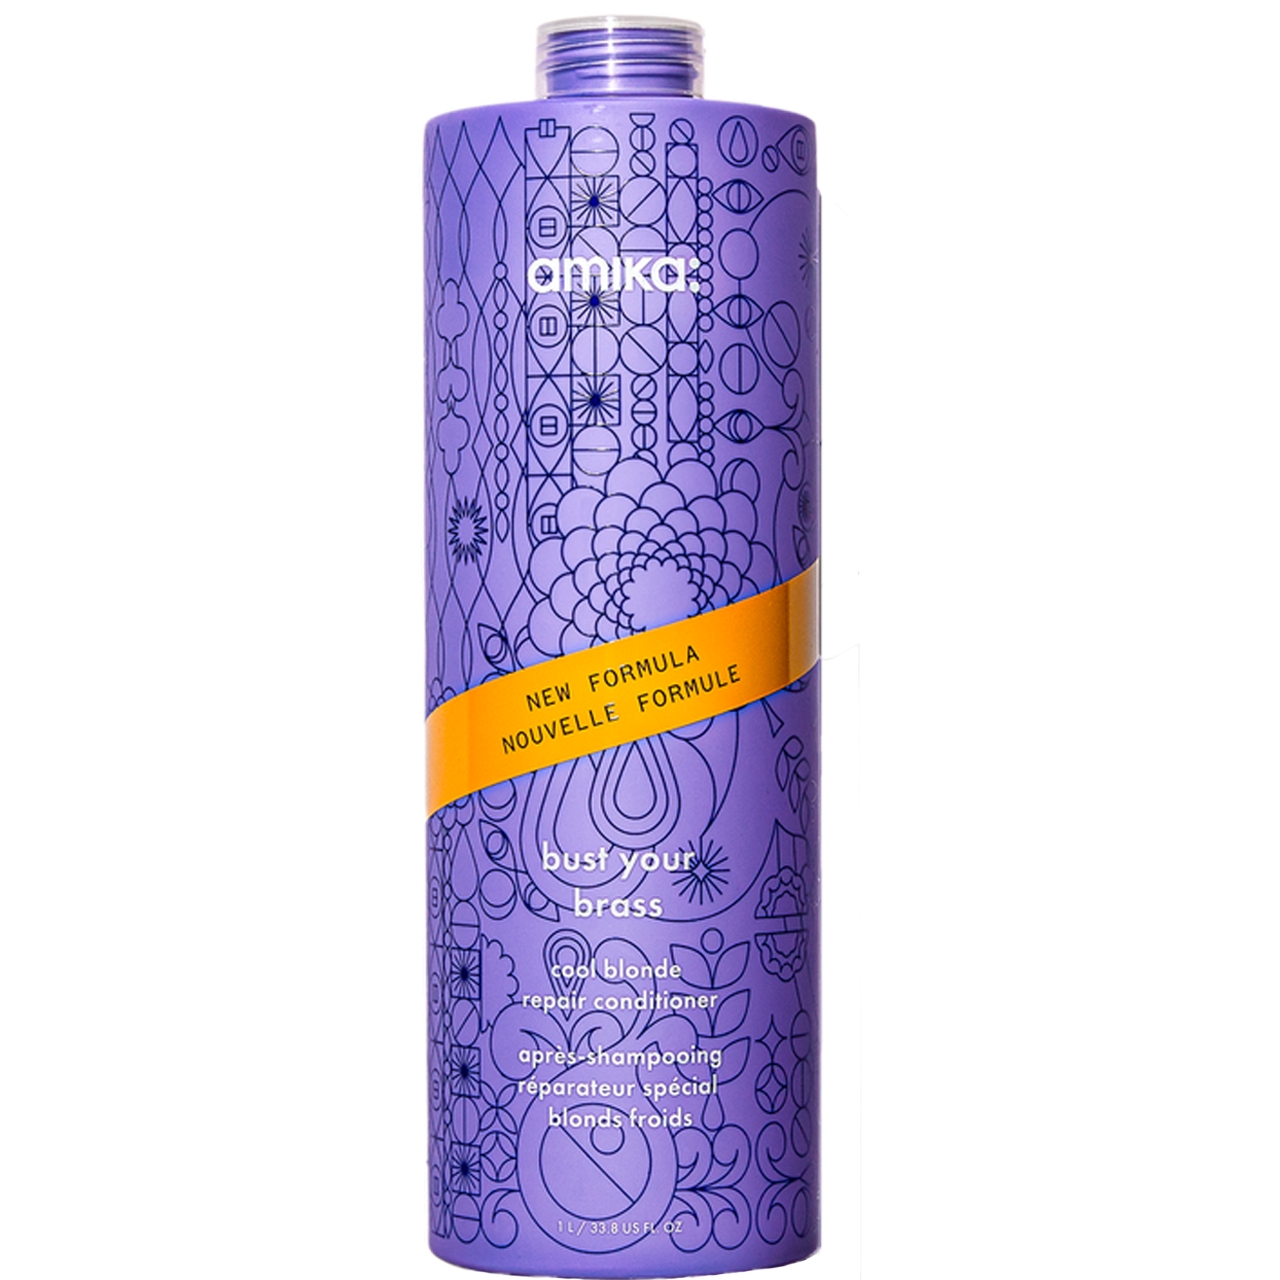 amika: bust your brass cool blonde repair conditioner Liter